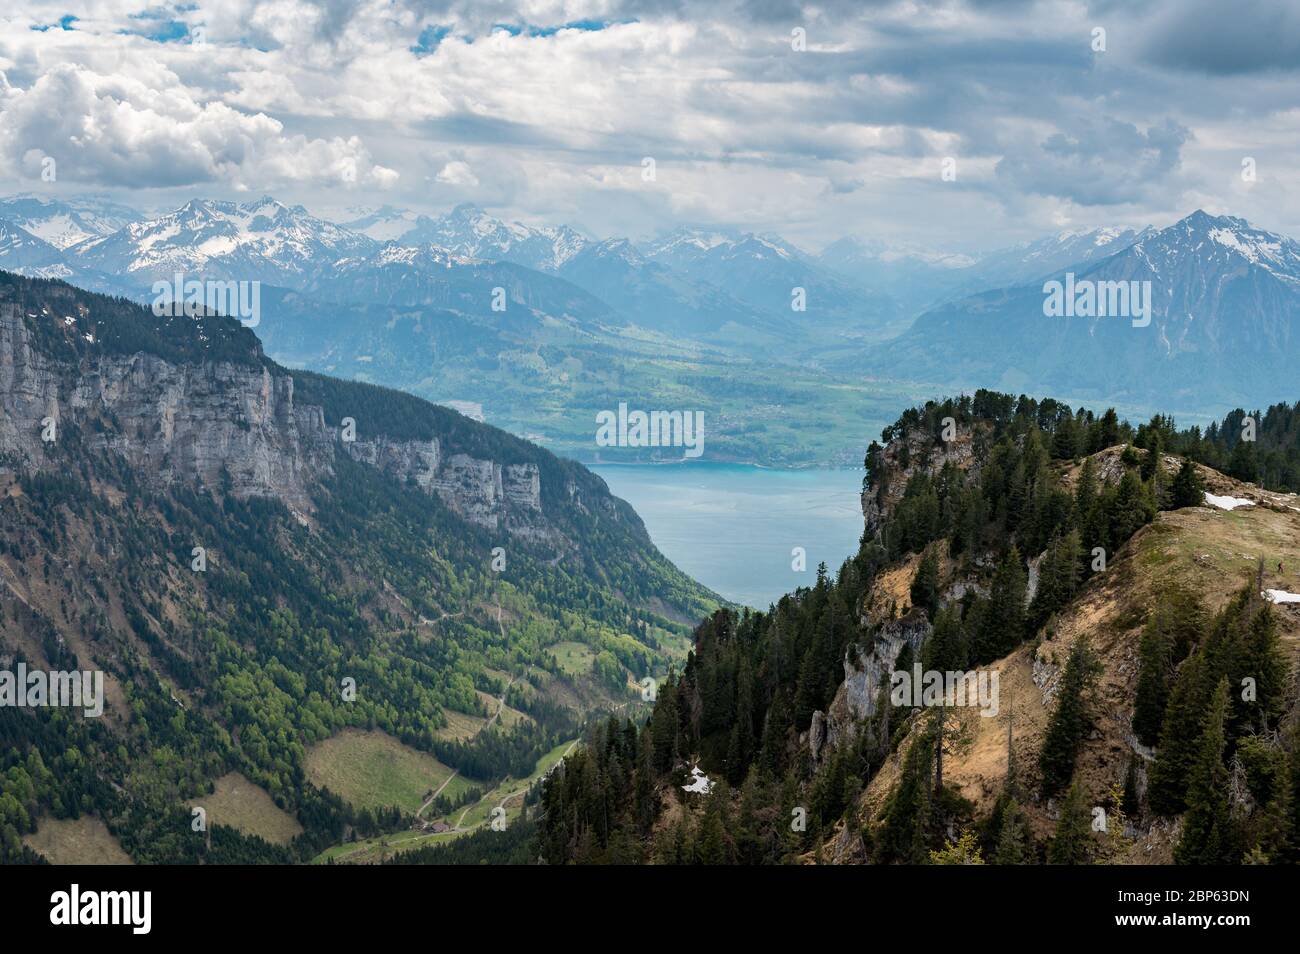 view from Oberbergli at Sigriswiler Grat into Justistal and Lake Thun Stock Photo